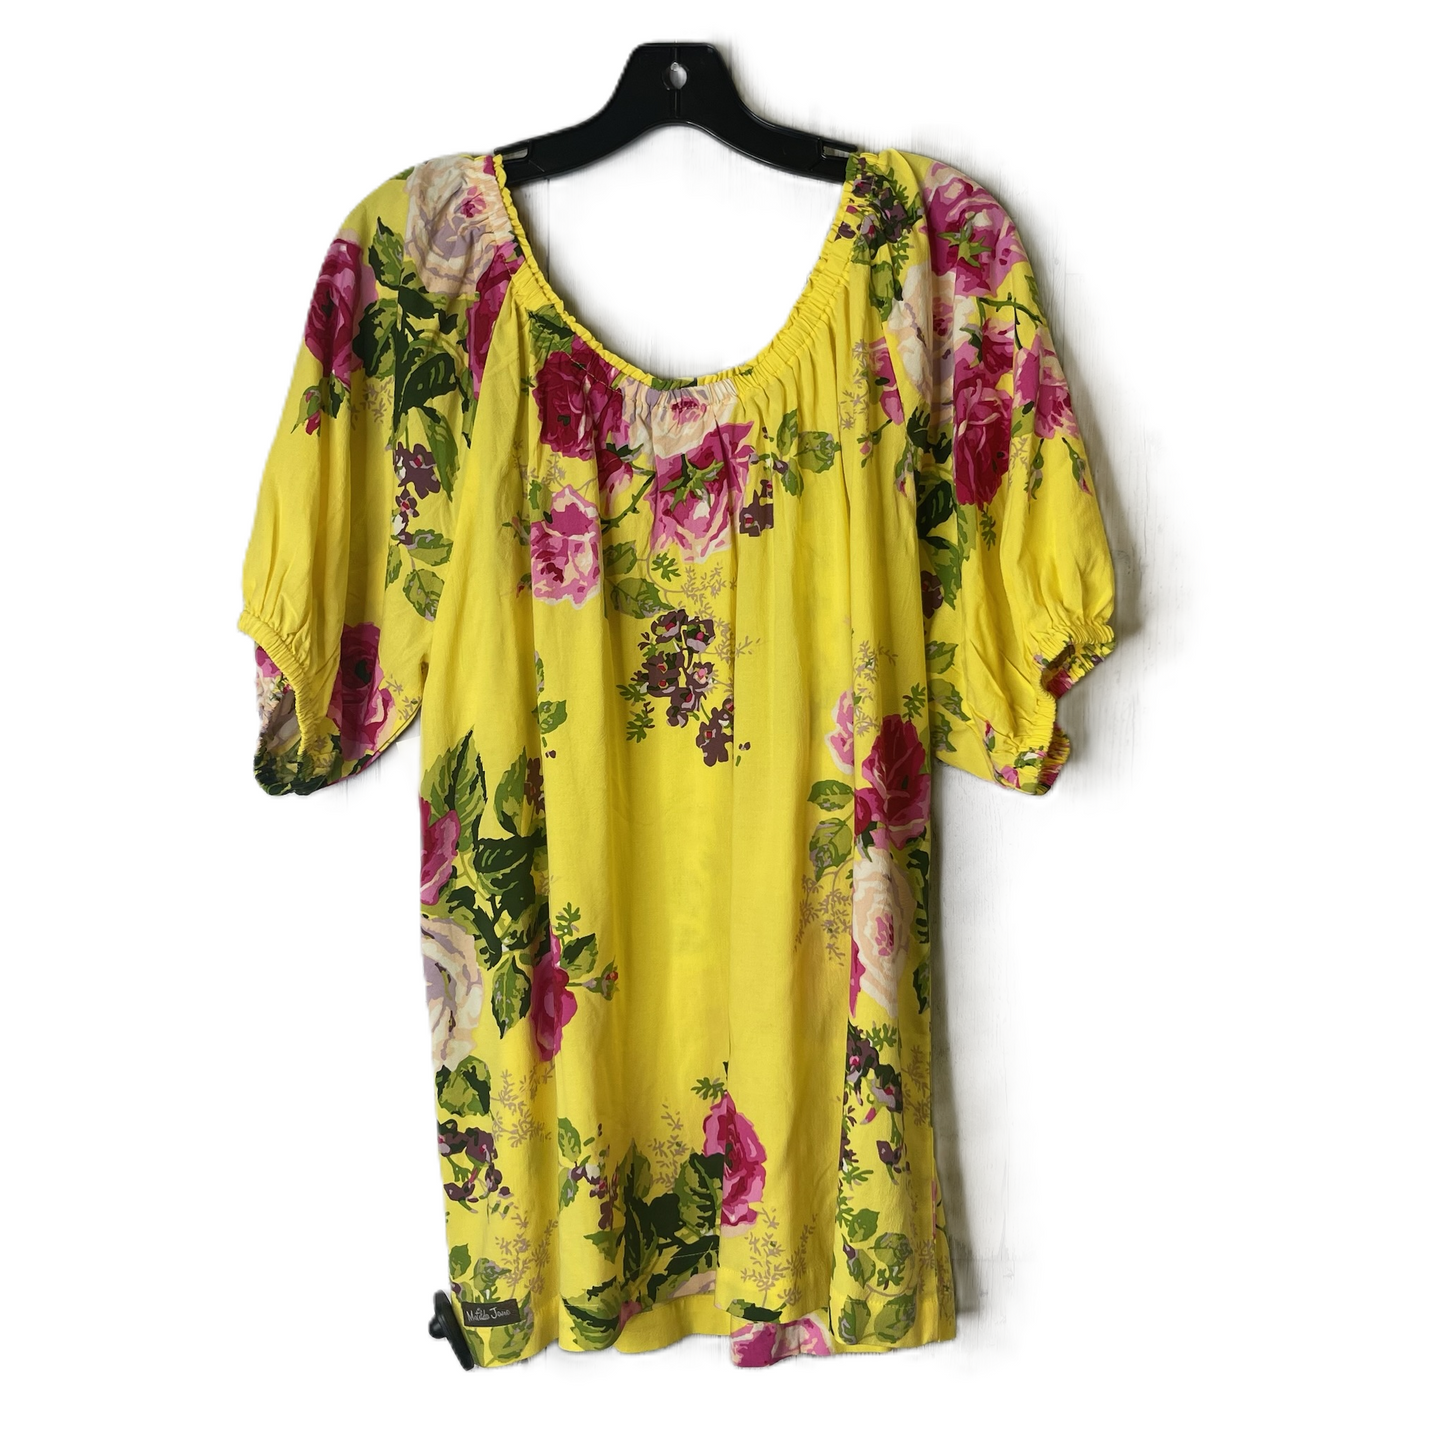 Yellow Top Short Sleeve By Matilda Jane, Size: L